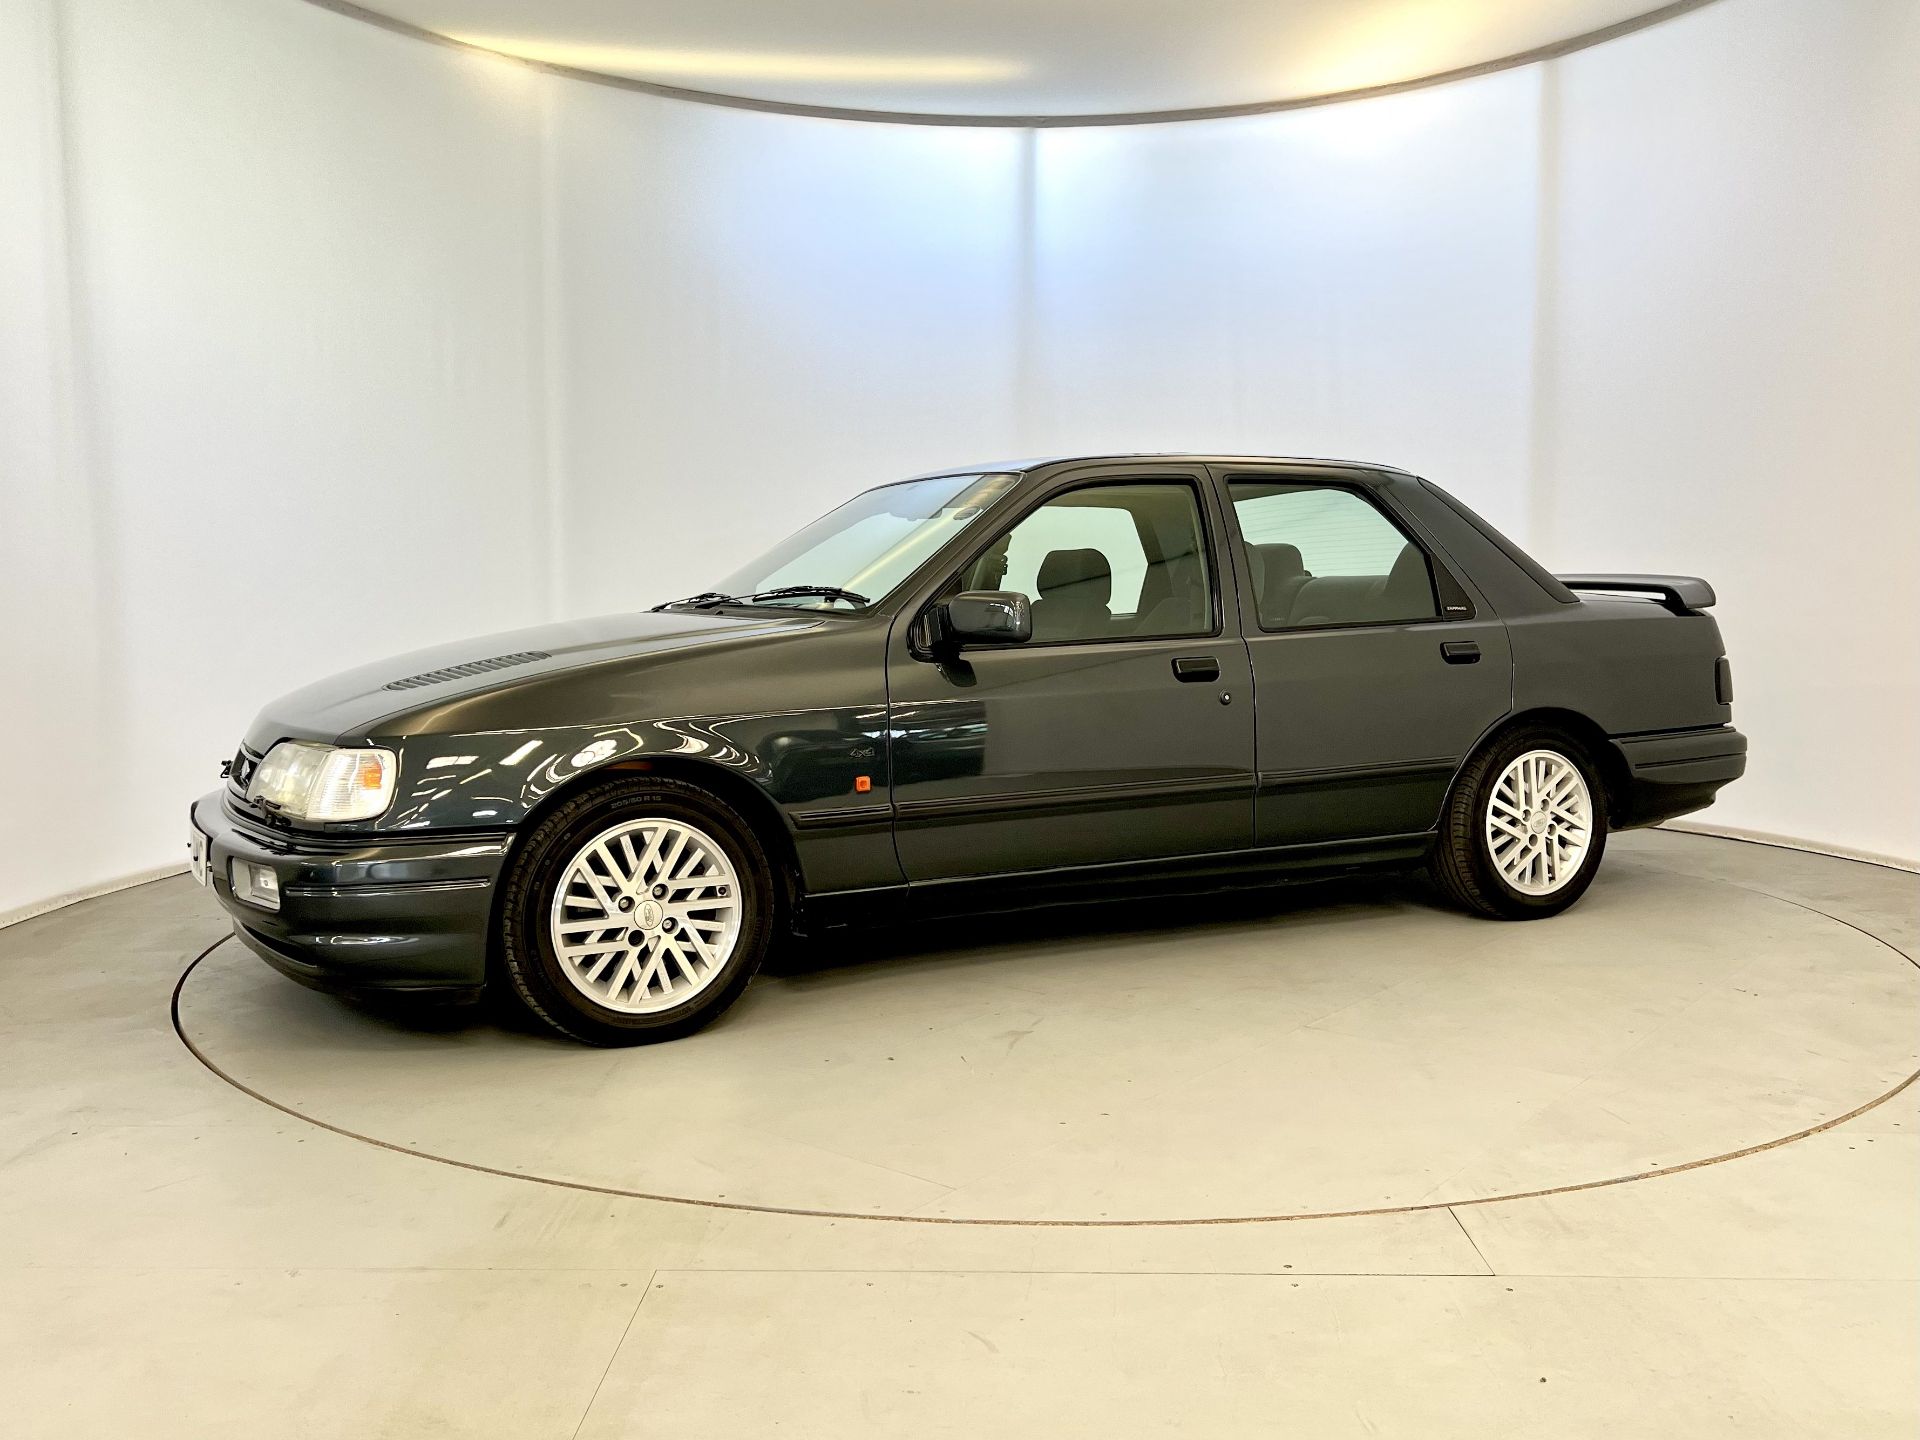 Ford Sierra Sapphire Cosworth - Image 4 of 37